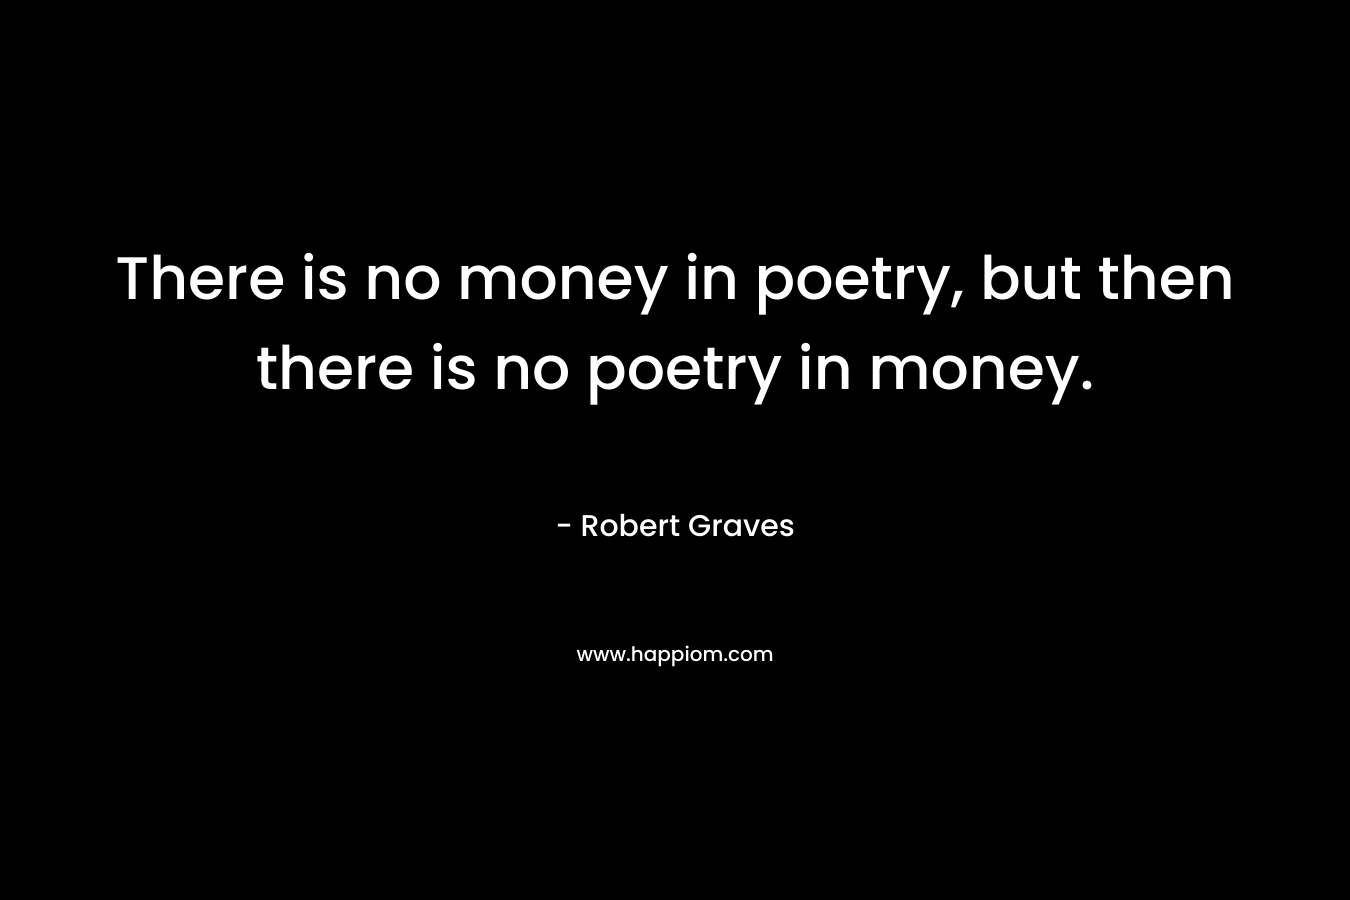 There is no money in poetry, but then there is no poetry in money.